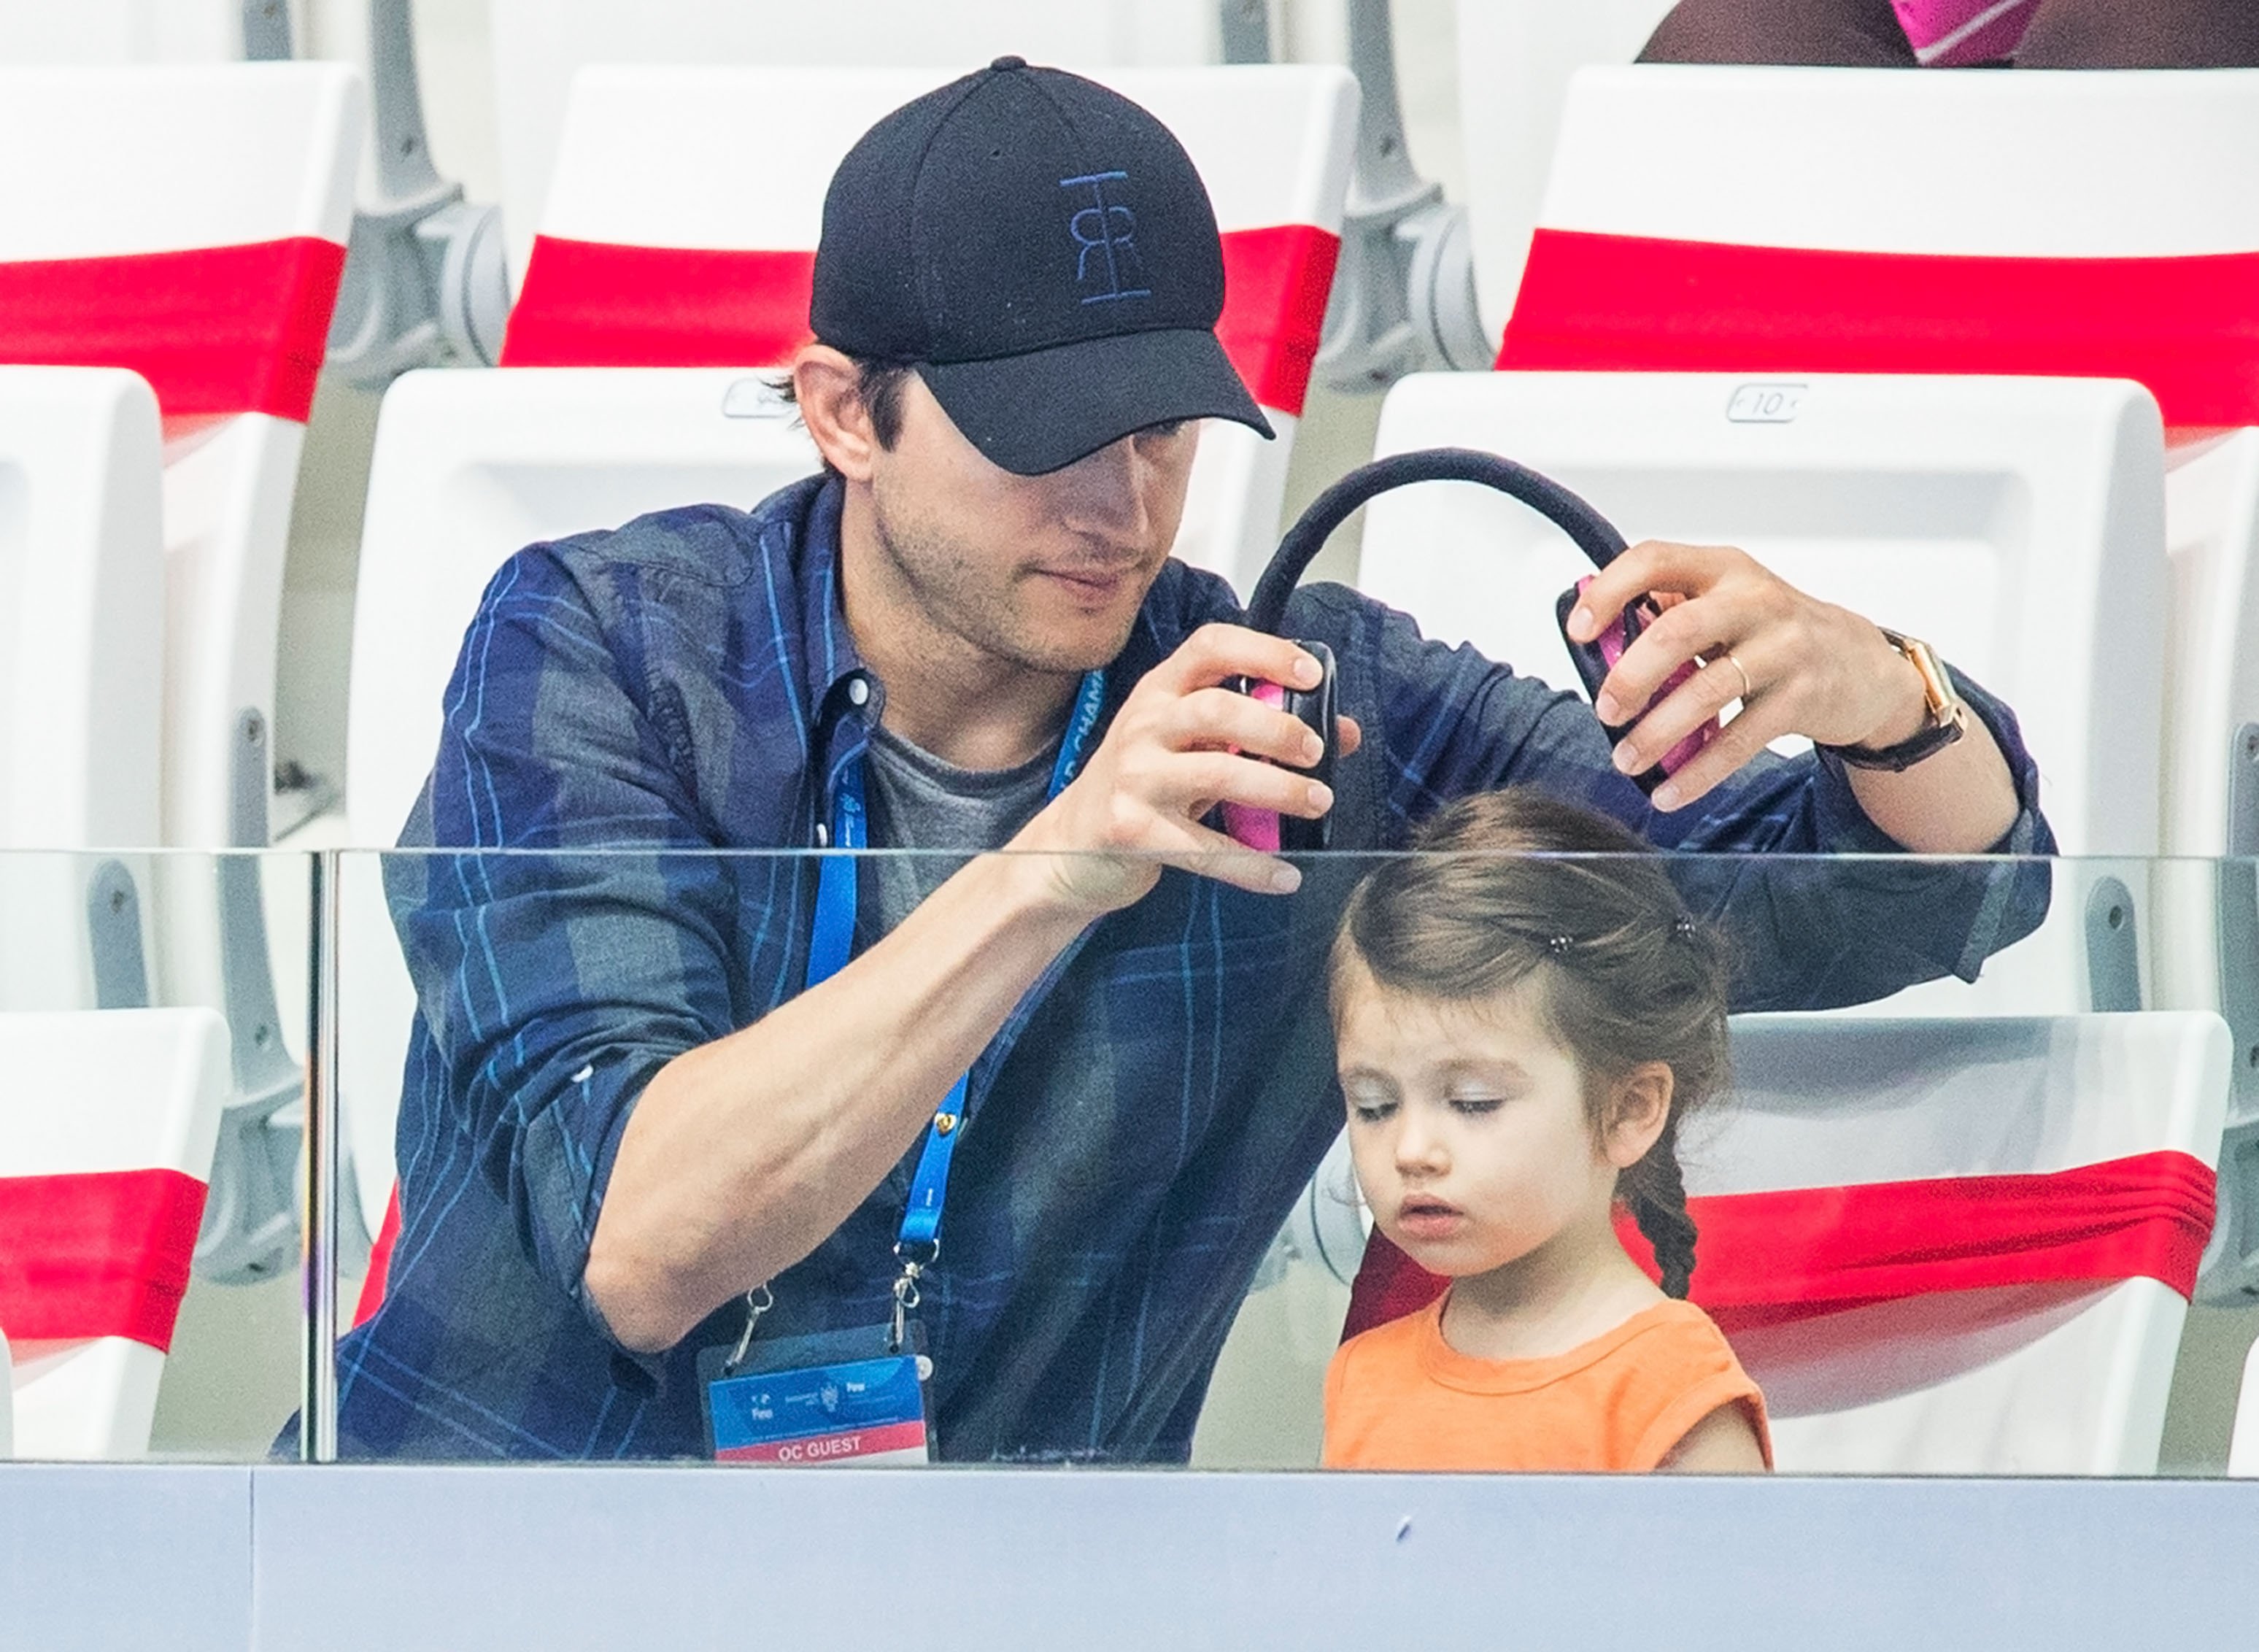 Ashton Kutcher and his daughter Wyatt in Hungary in 2017 | Source: Getty Images 